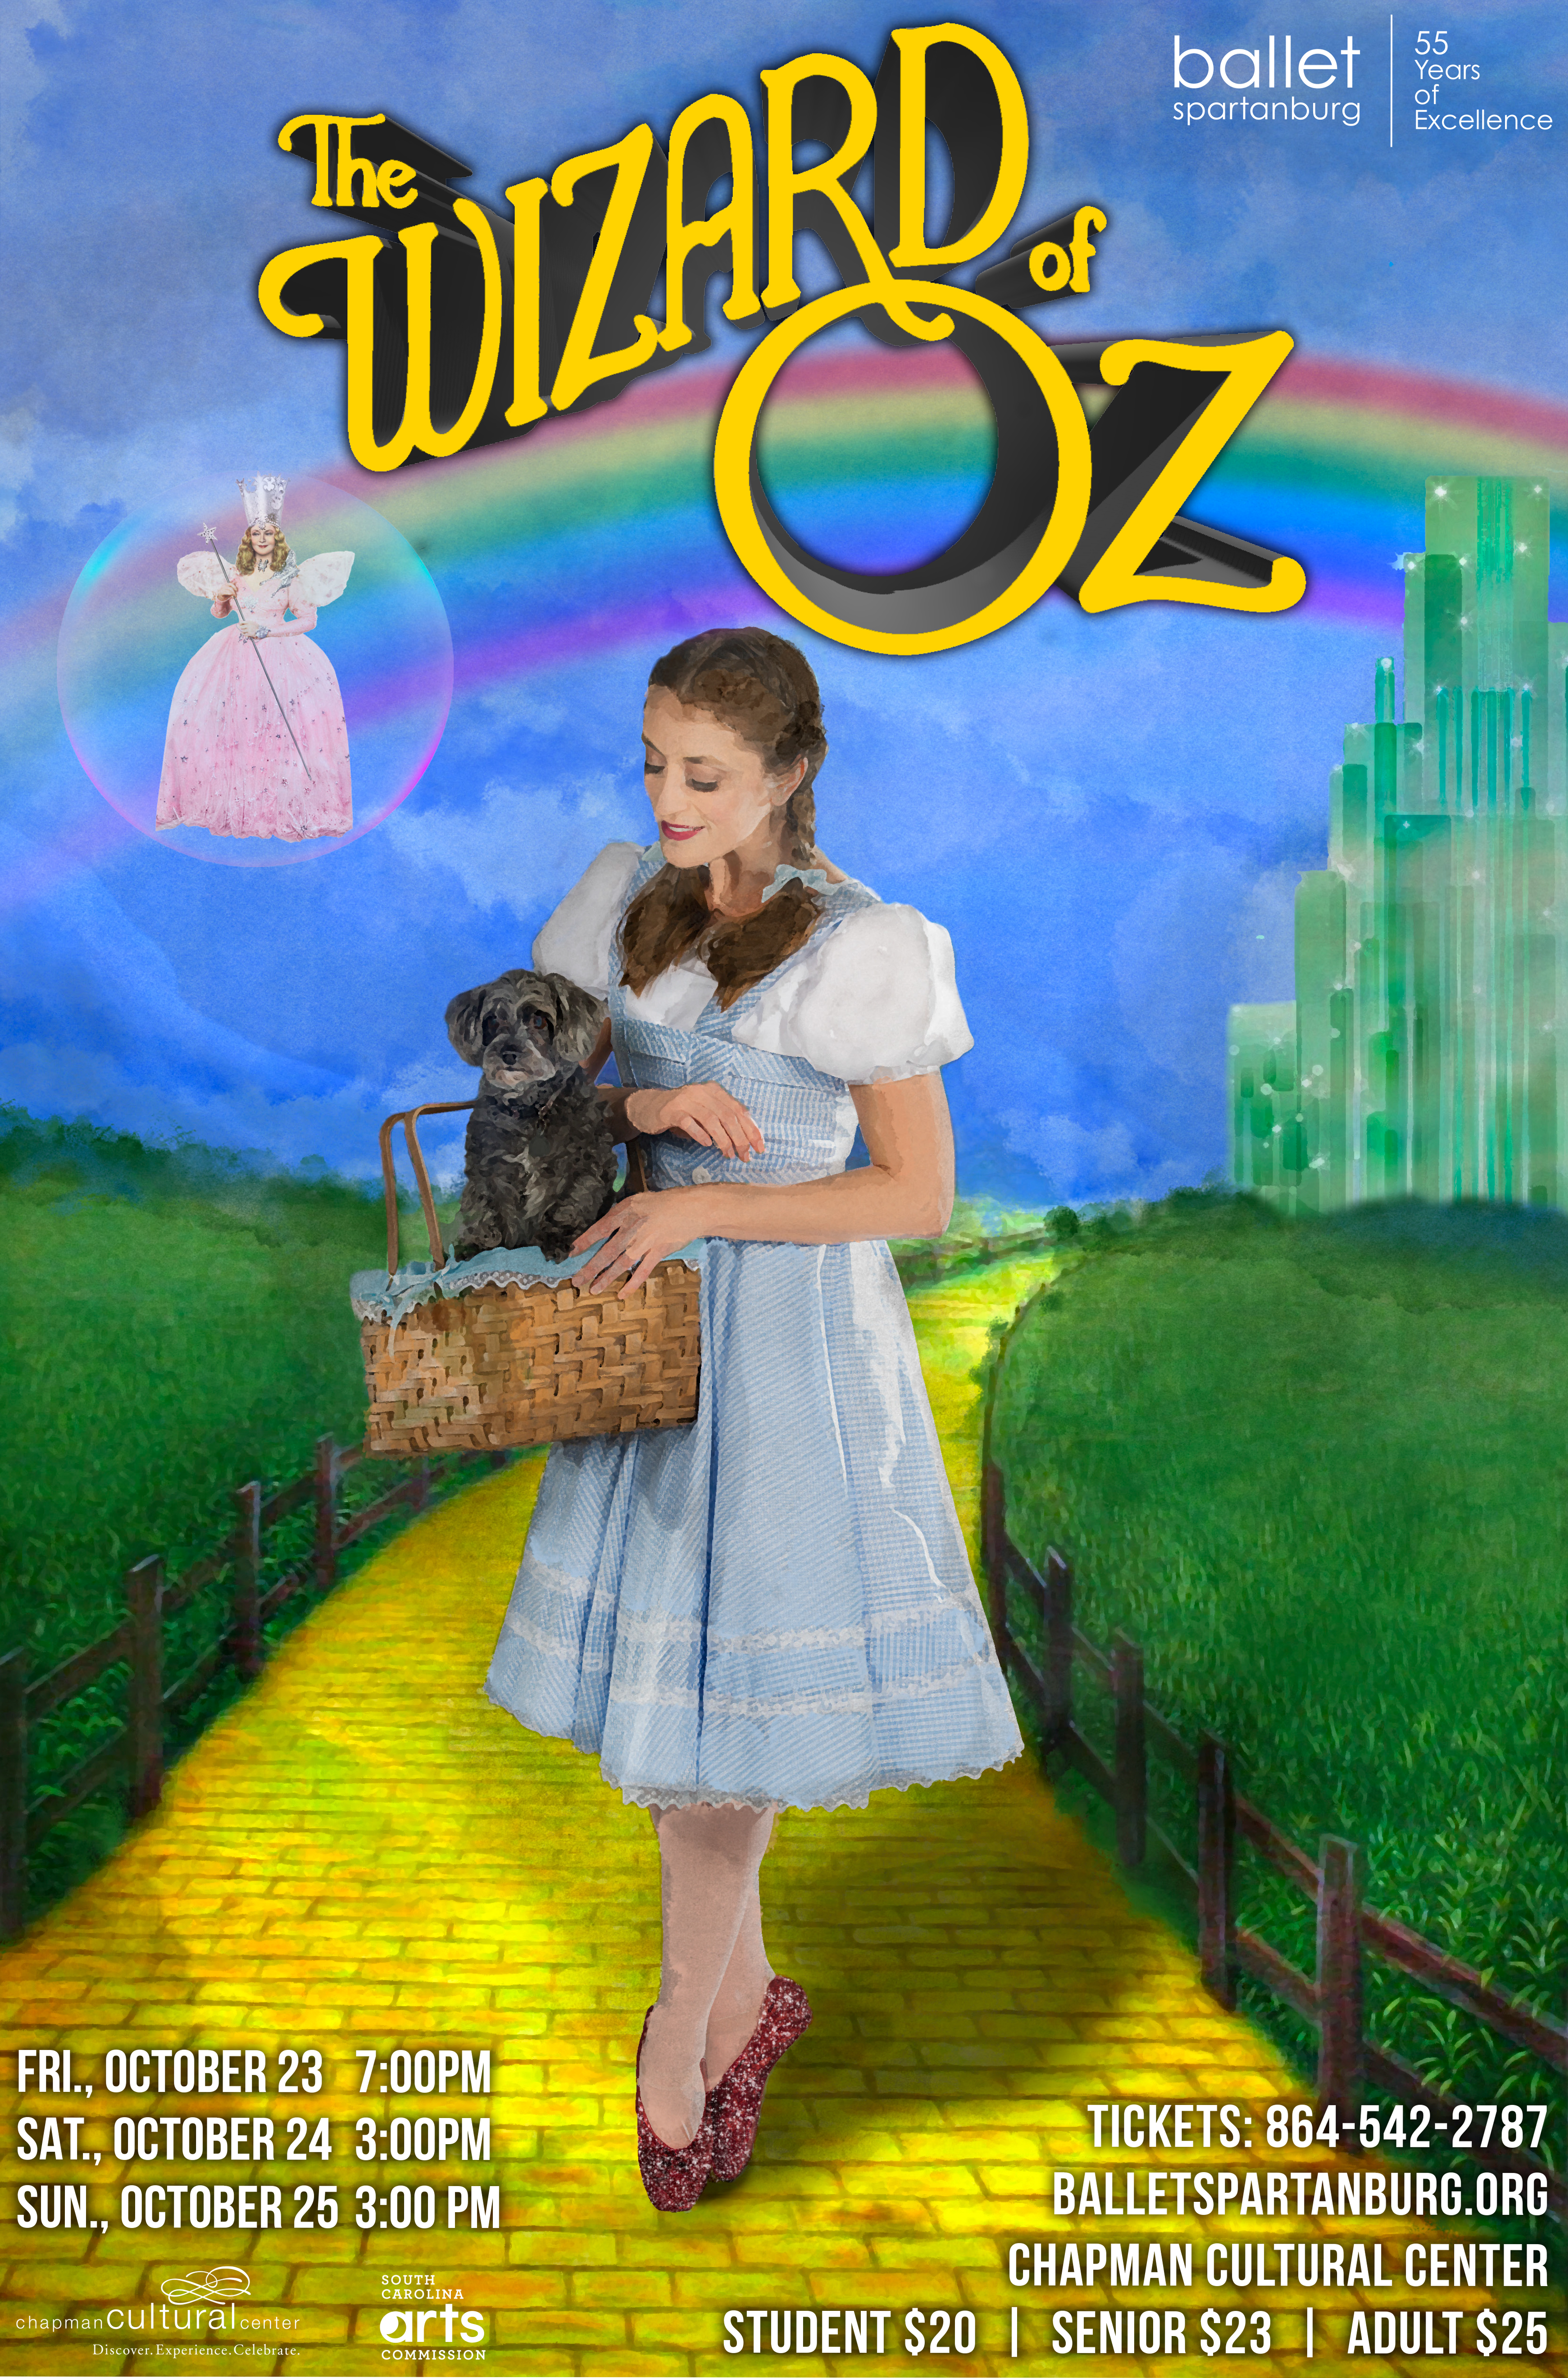 Oz wizard of The Wizard